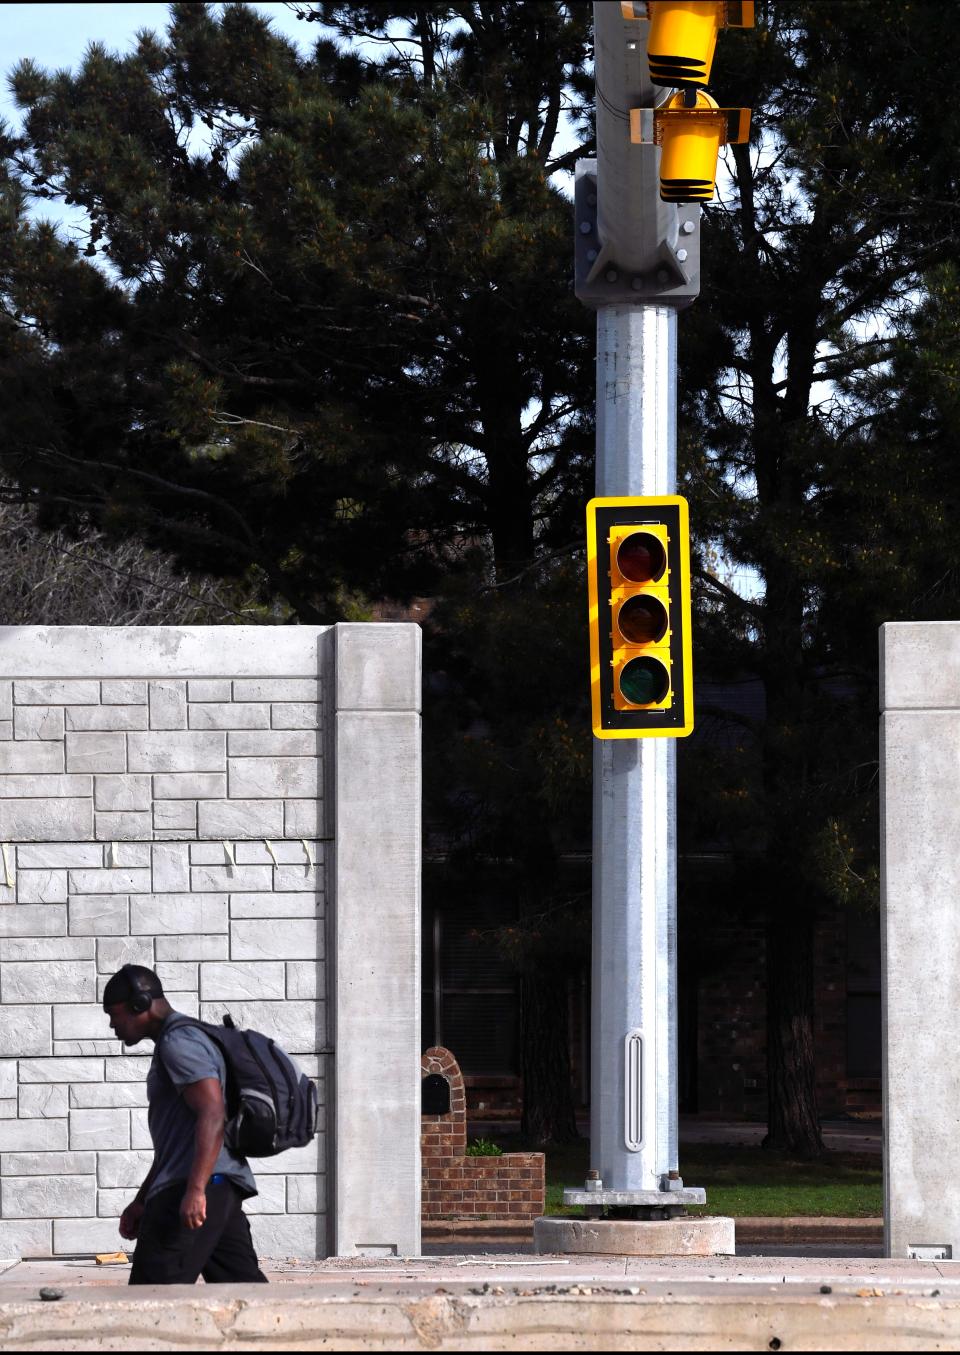 A pedestrian passes a traffic signal occupying a break in the new wall separating Buffalo Gap Road from homes on Flintlock Dr. in south Abilene Wednesday.